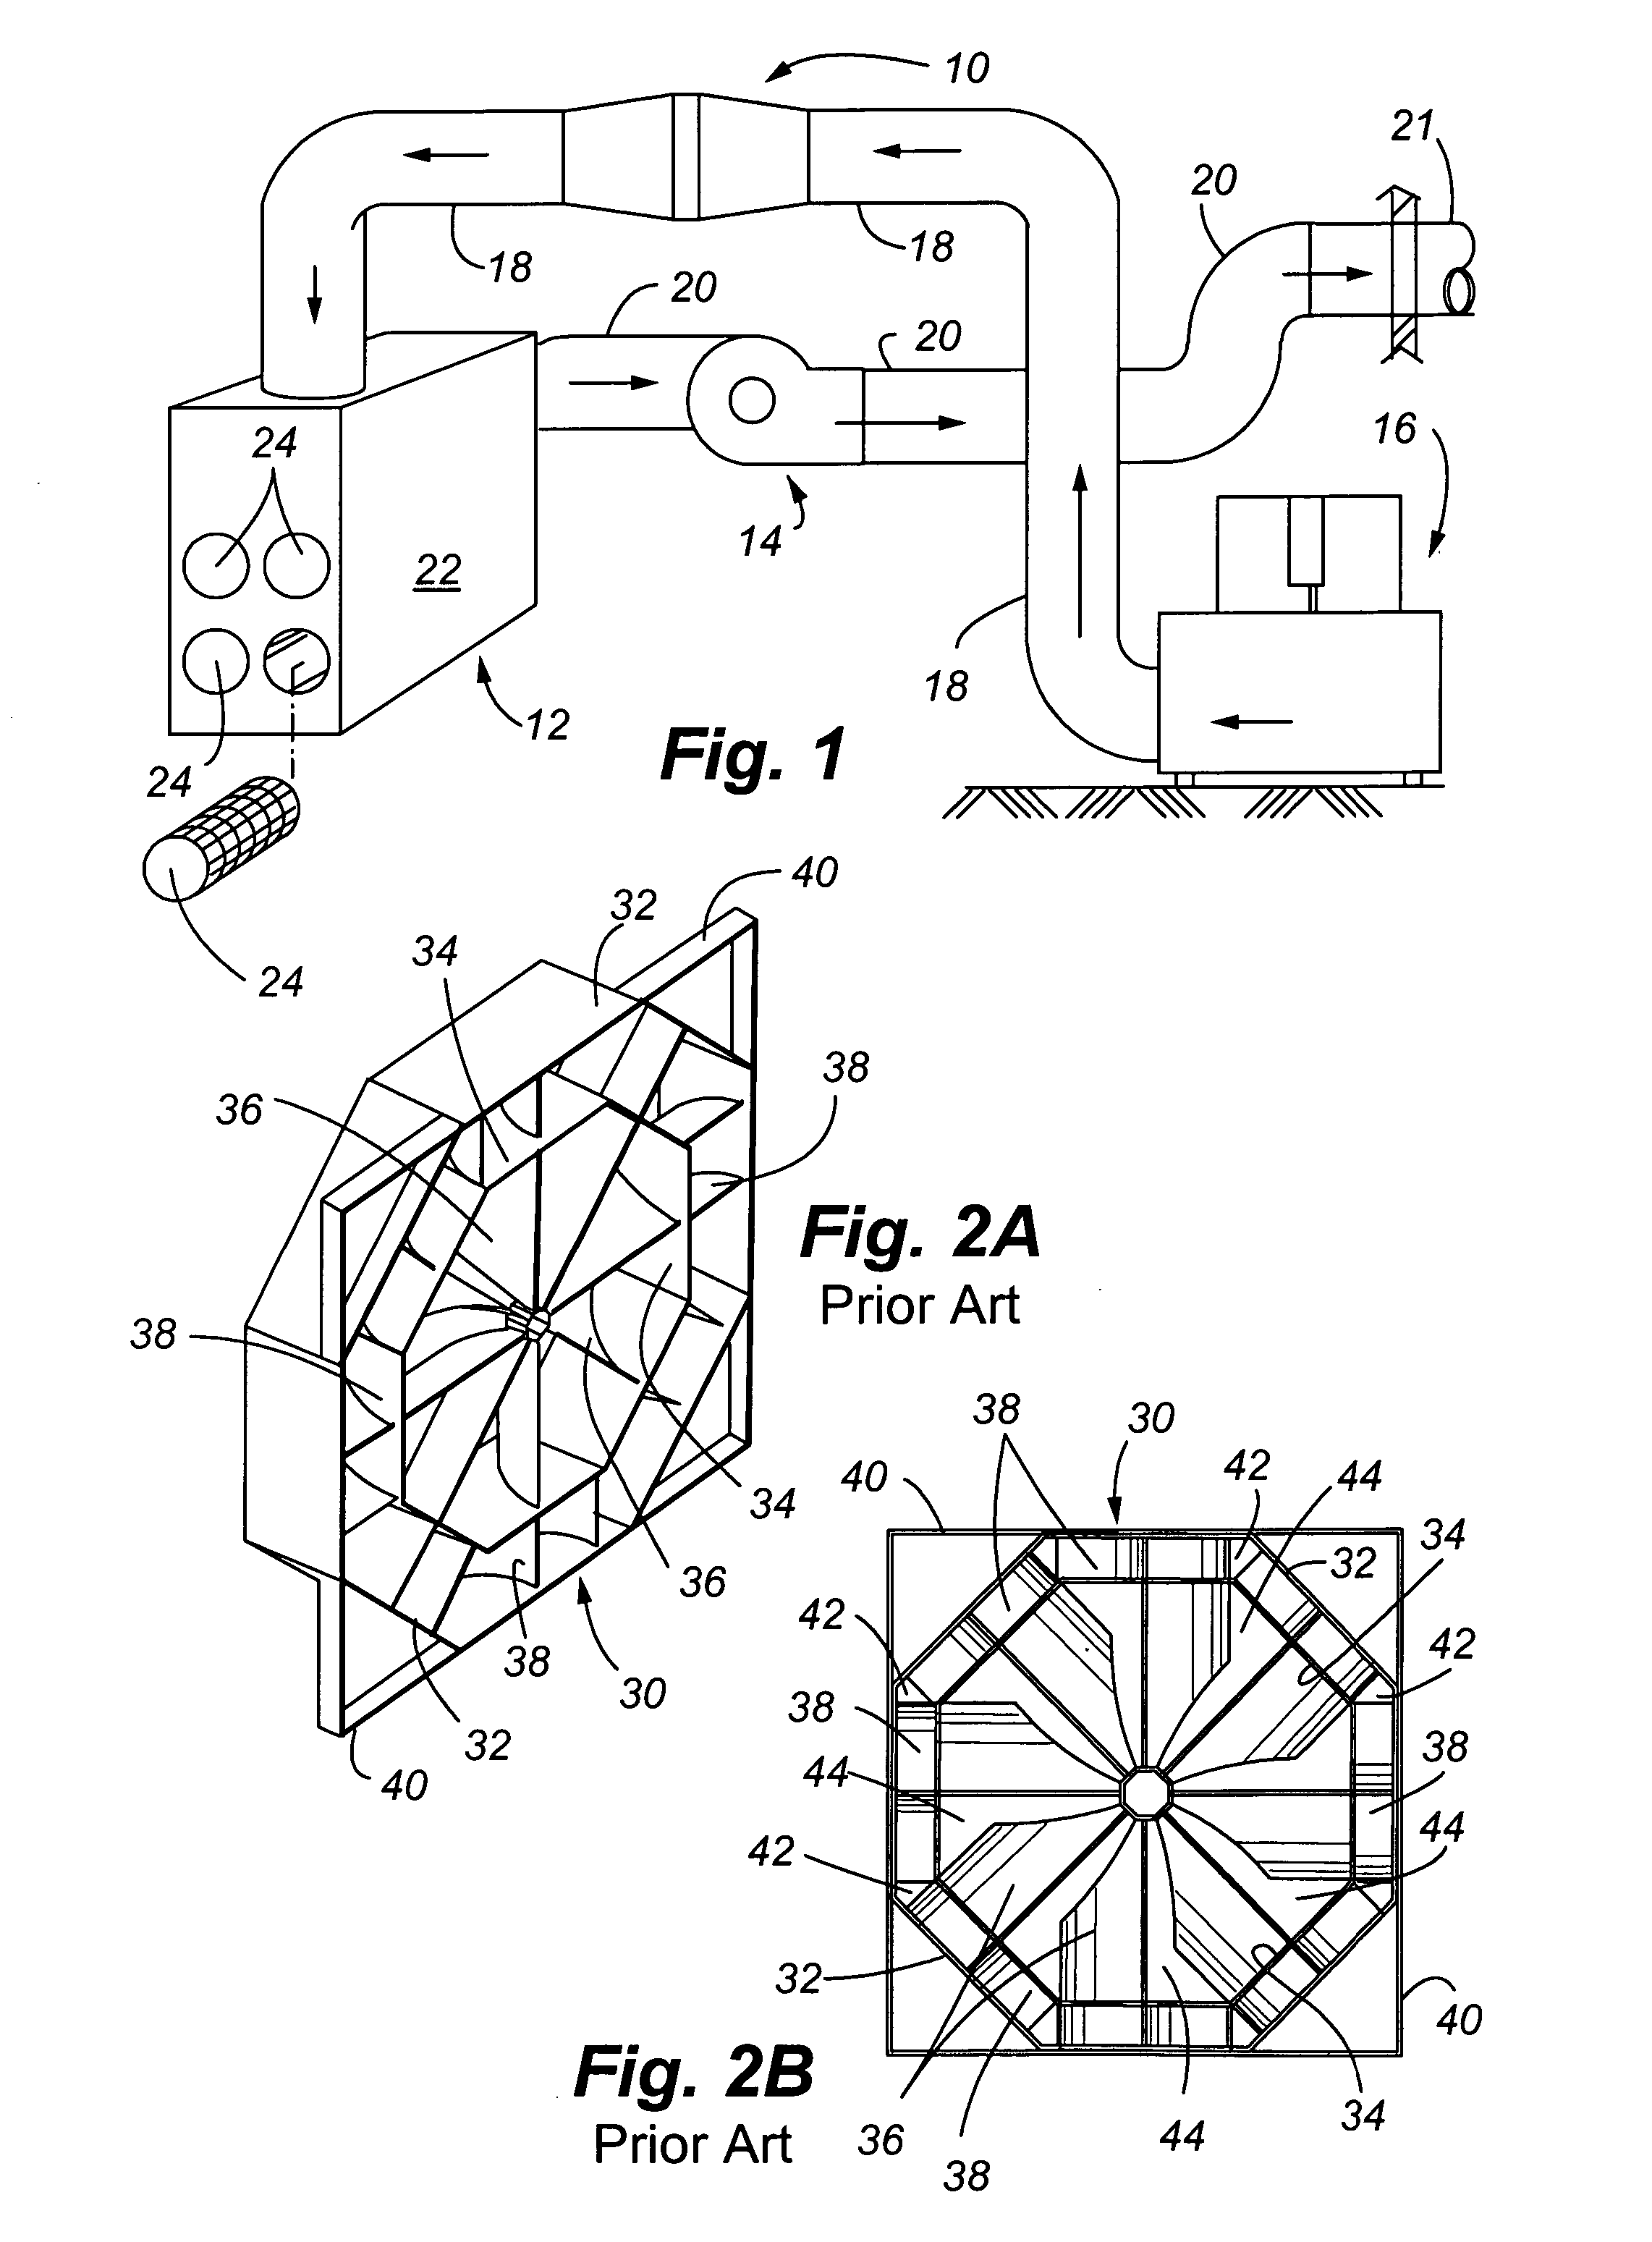 Method and apparatus for suppressing sparks